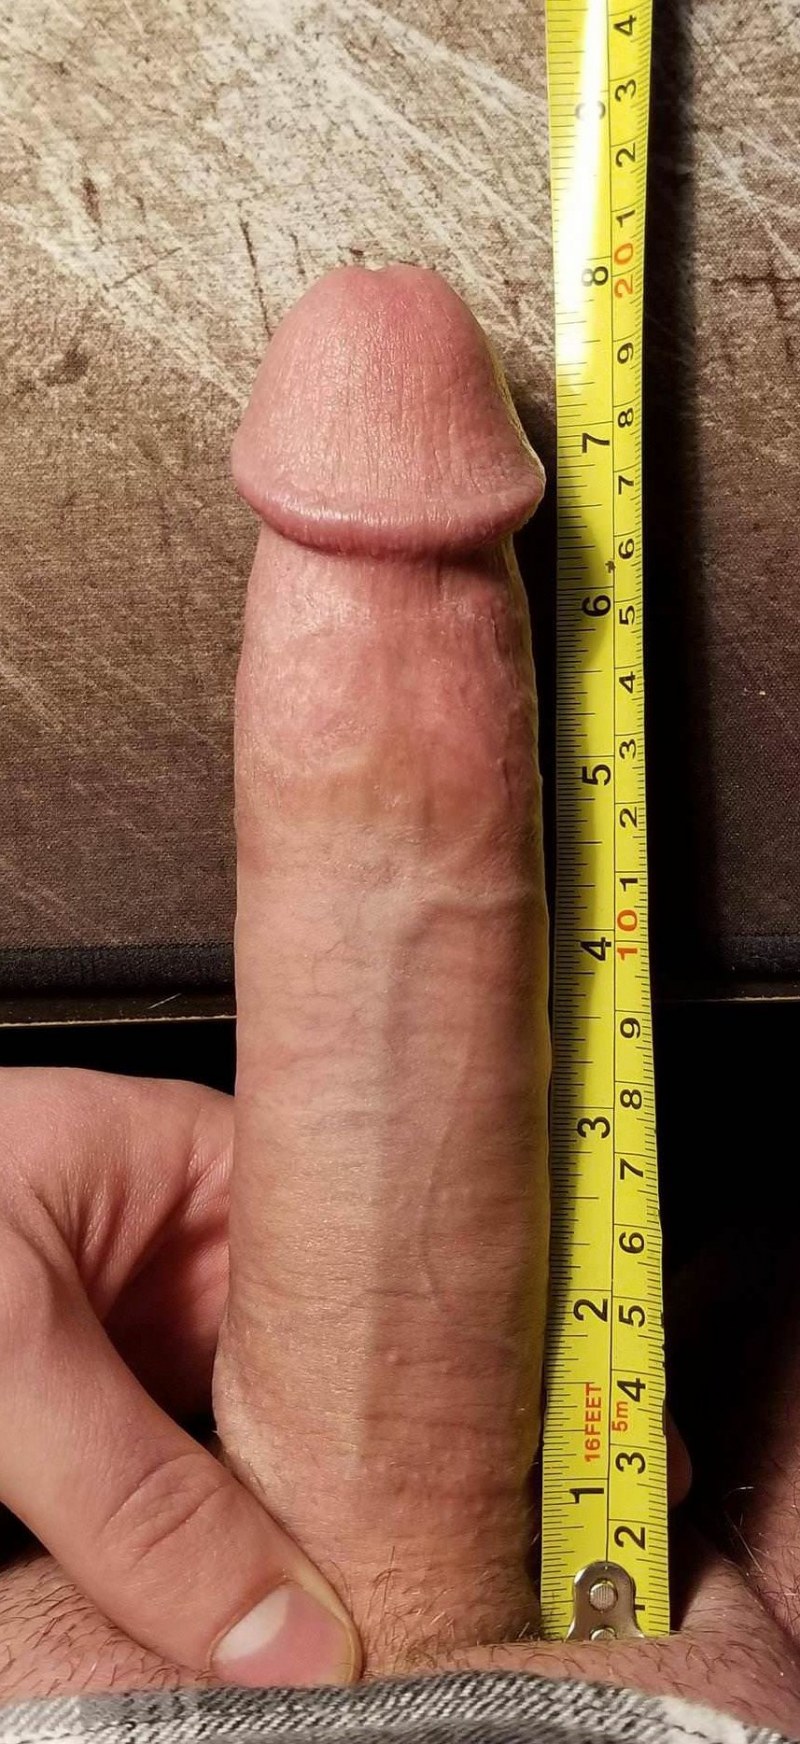 Is a 7.5 inch dick big